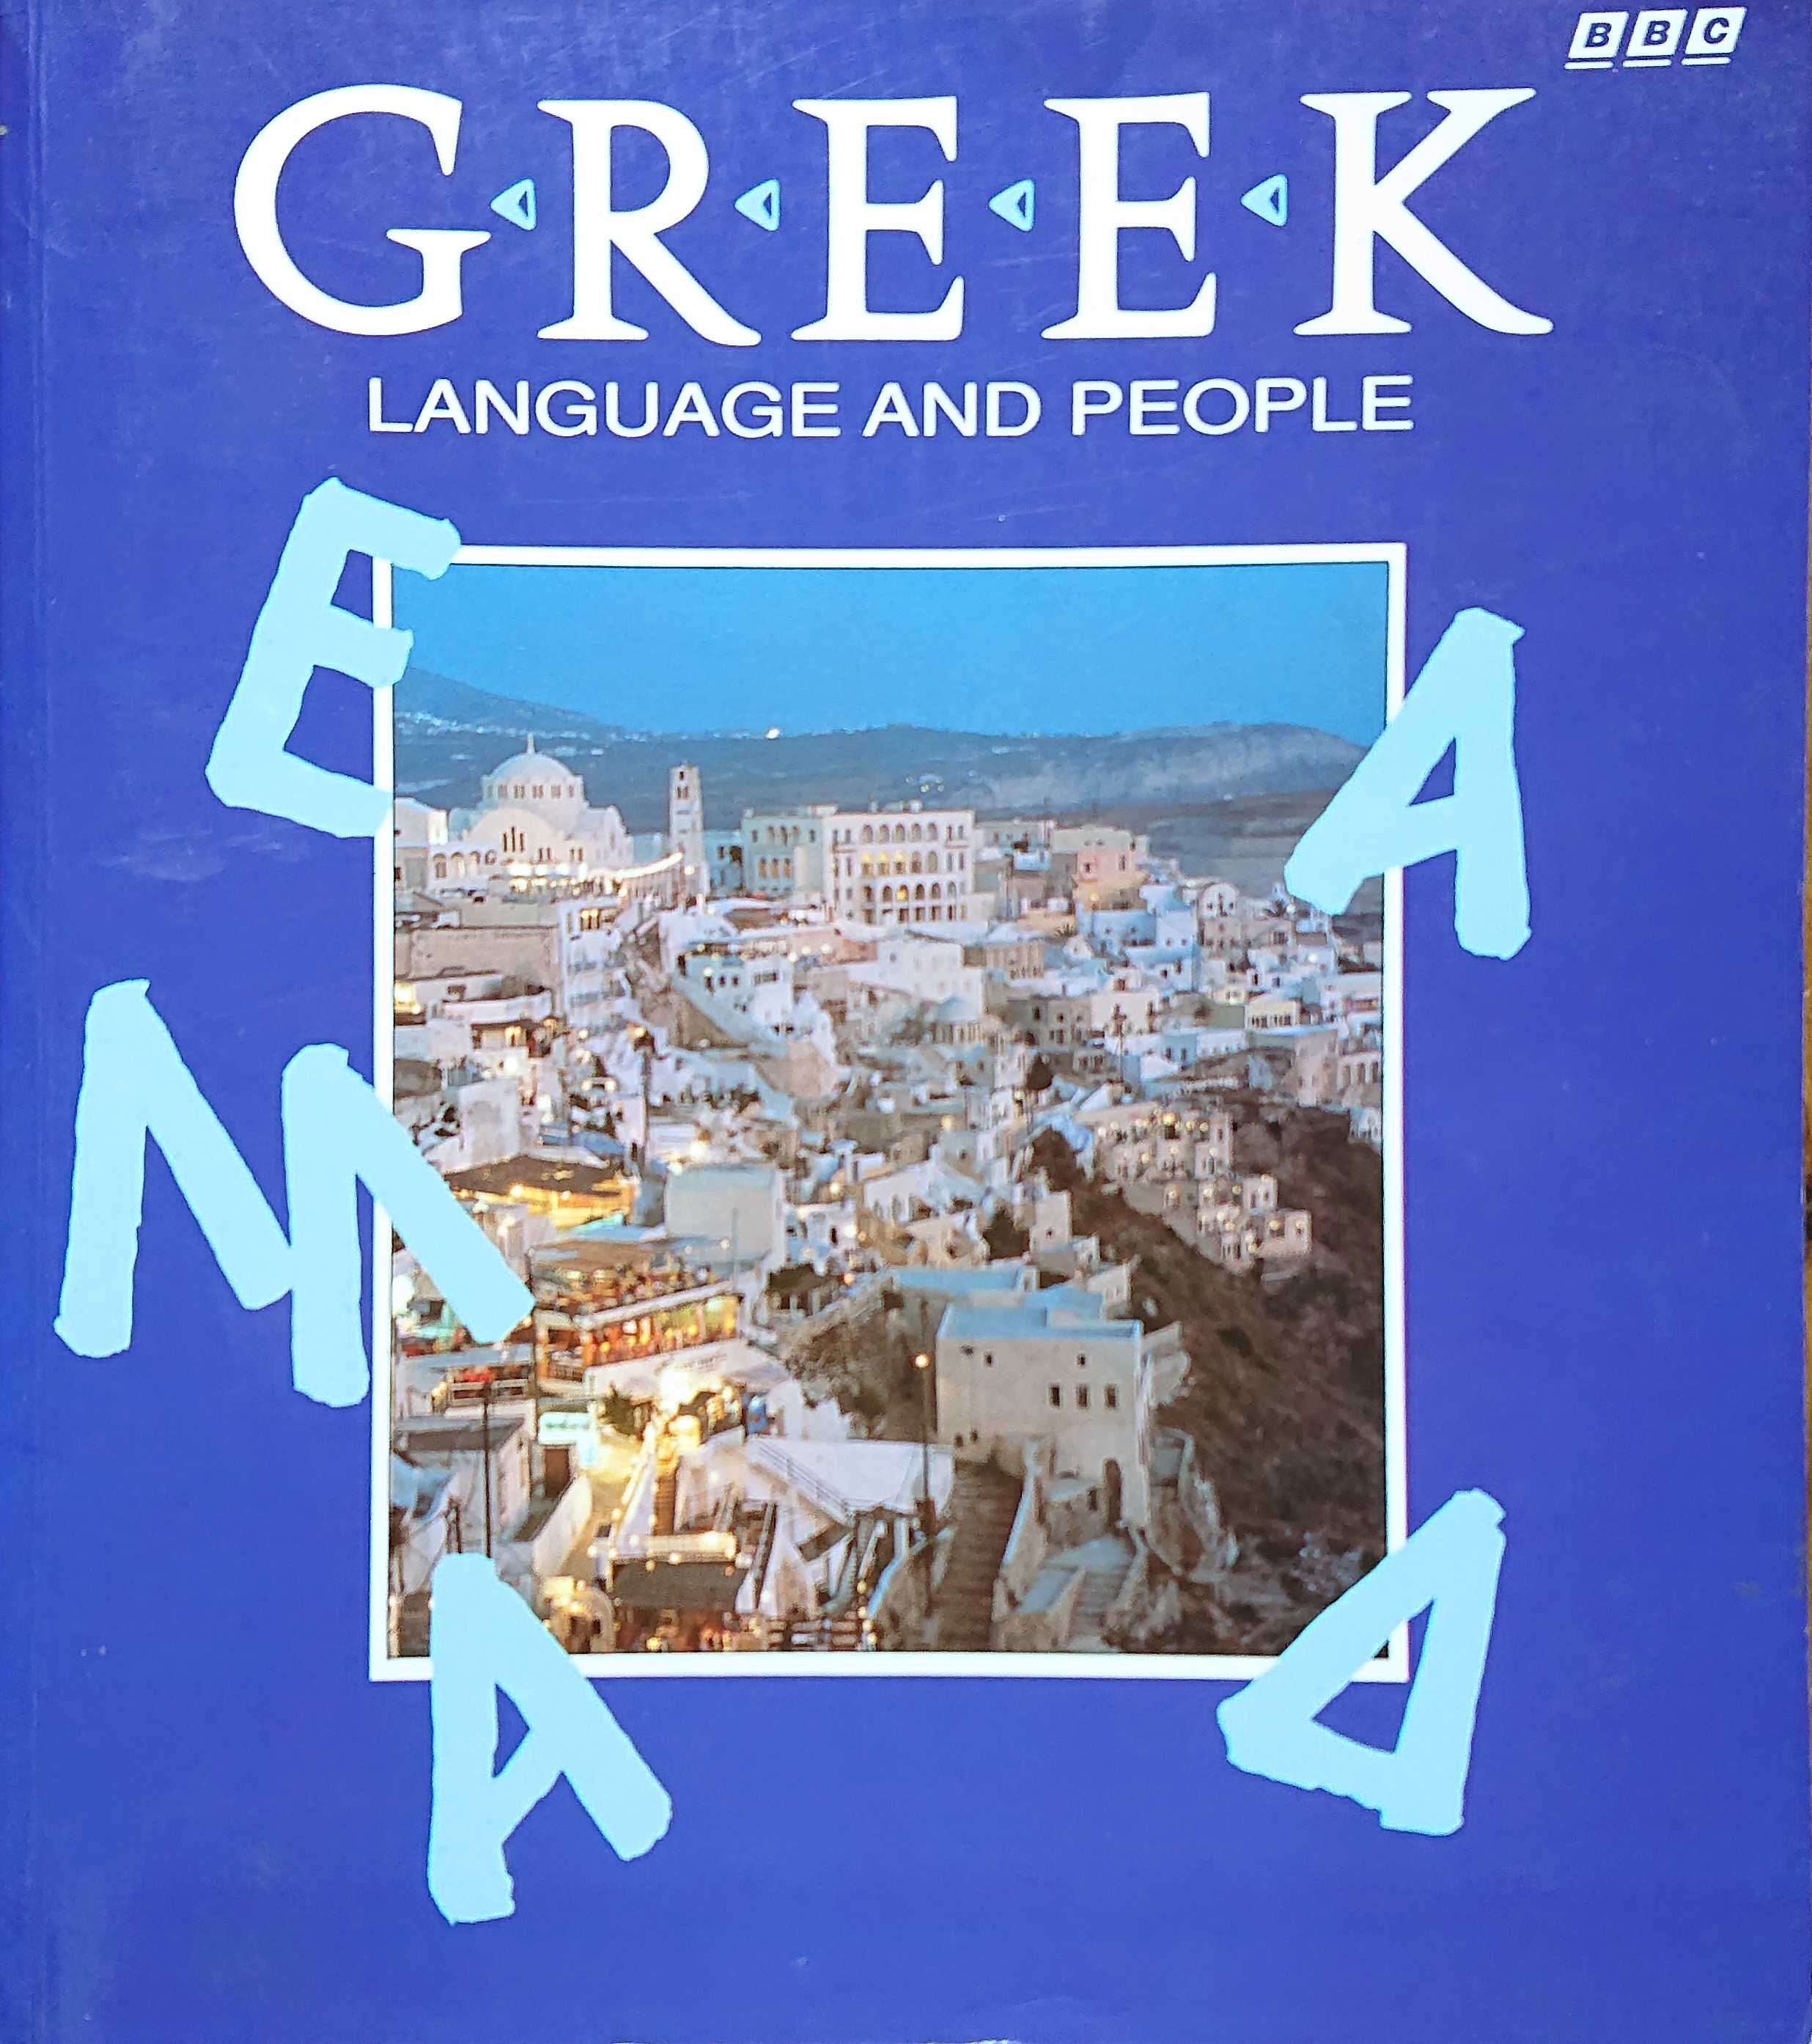 Picture of ISBN 0-563-16575-8 Greek language and people by artist David A. Hardy from the BBC records and Tapes library